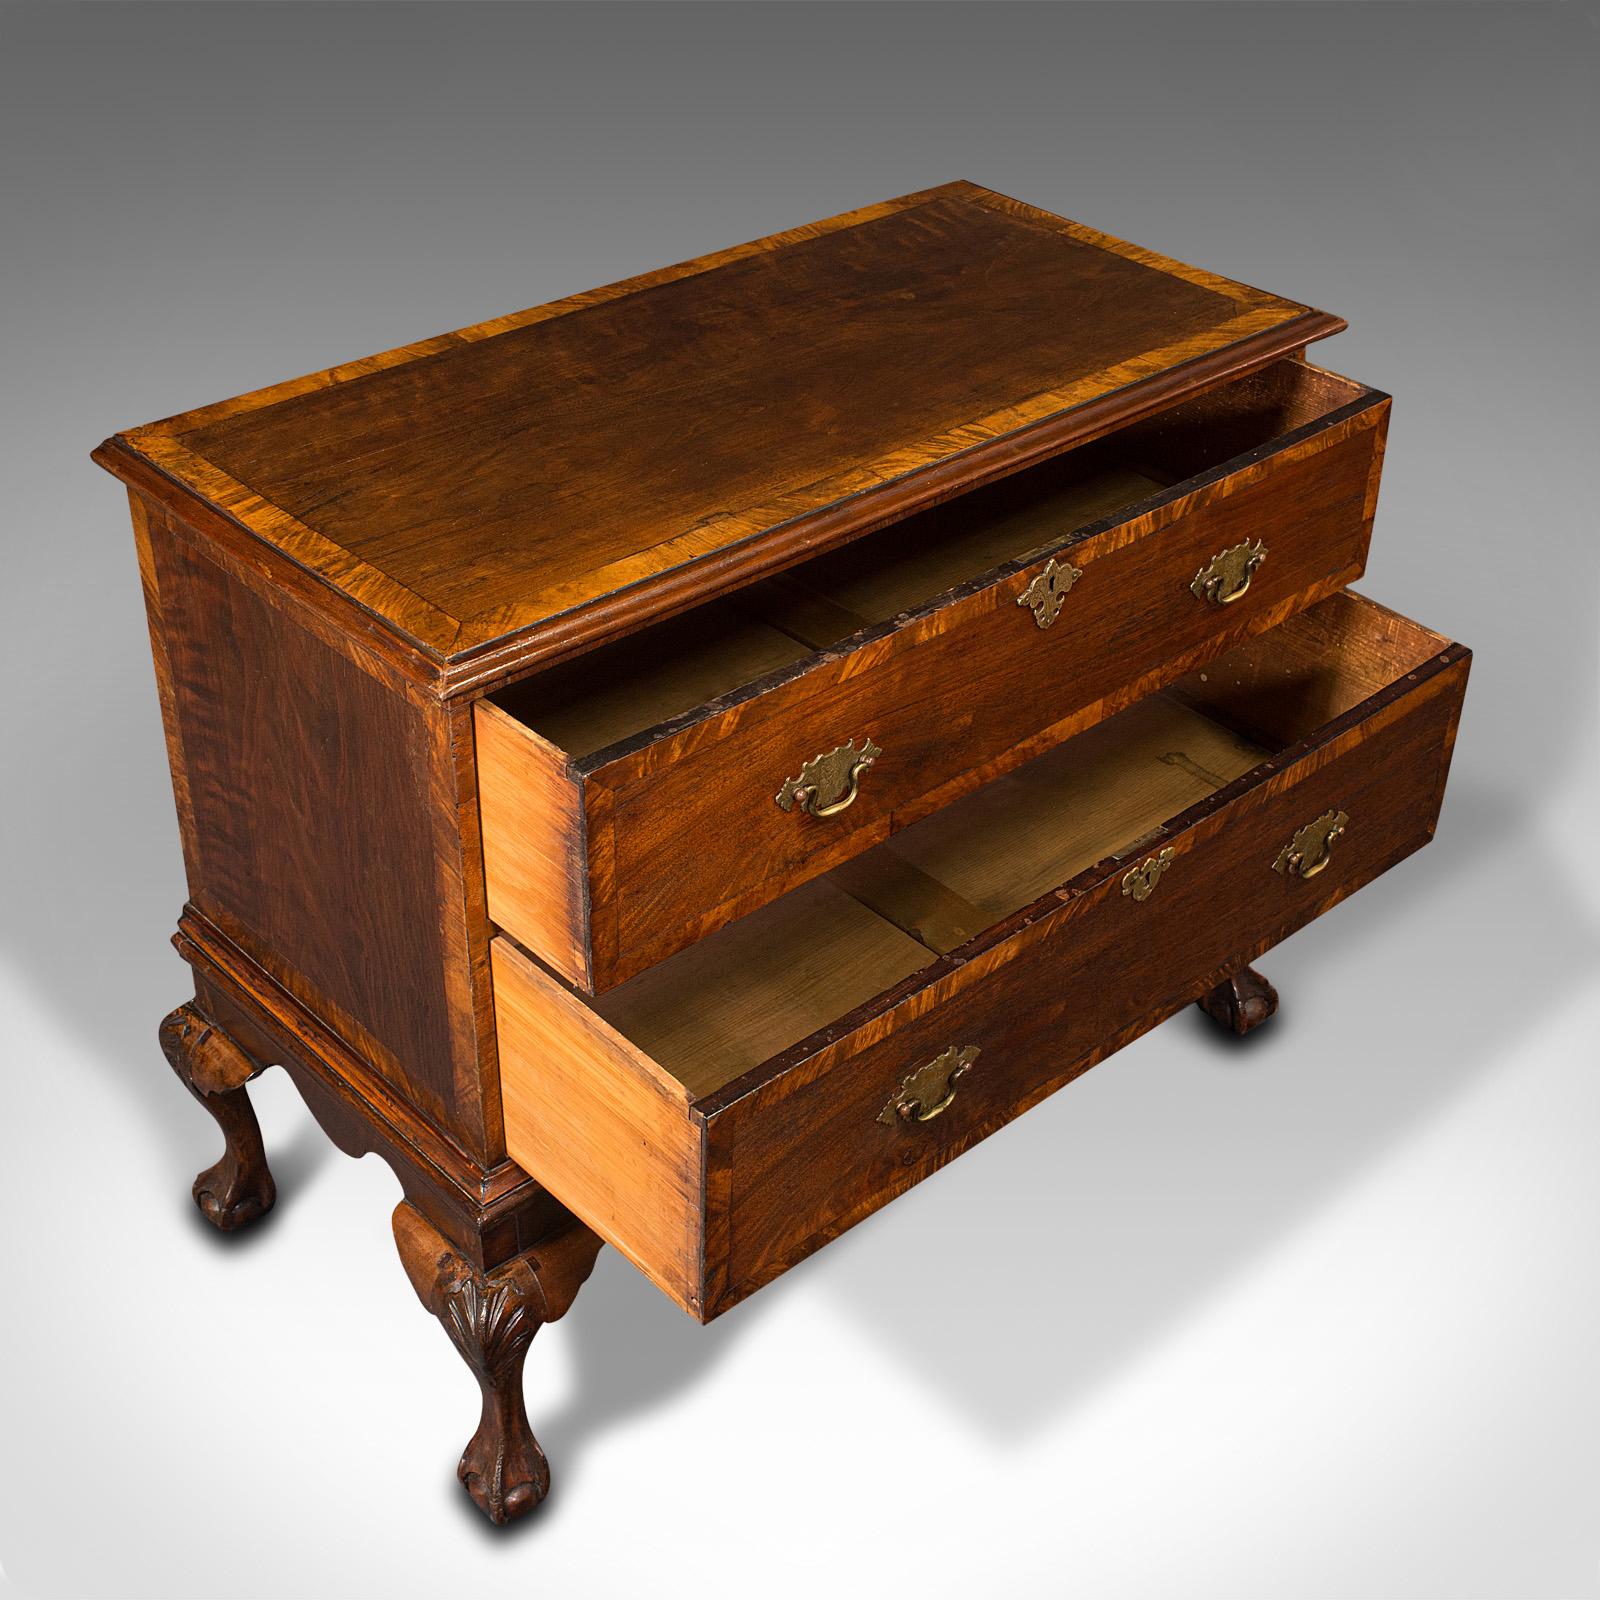 19th Century Antique Chest on Stand, English, Lowboy, Chest of Drawers, Victorian, Circa 1870